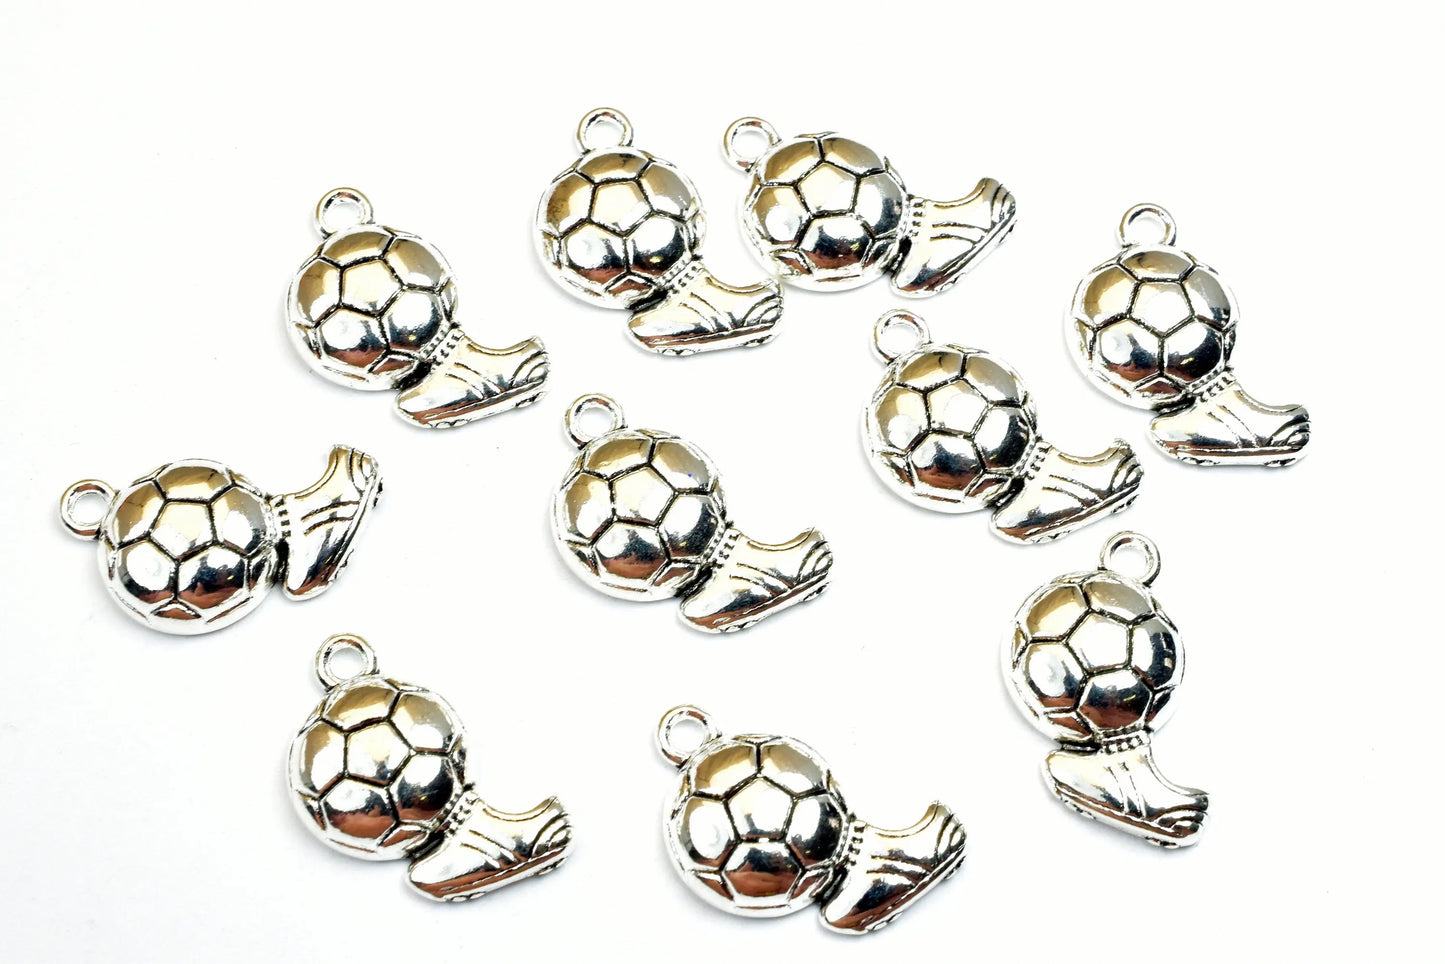 Soccer Ball Sport Charms With Shoe Size 20x12mm Silver Color Charm Pendant Finding For Jewelry Making 10PCs Per Pack - BeadsFindingDepot